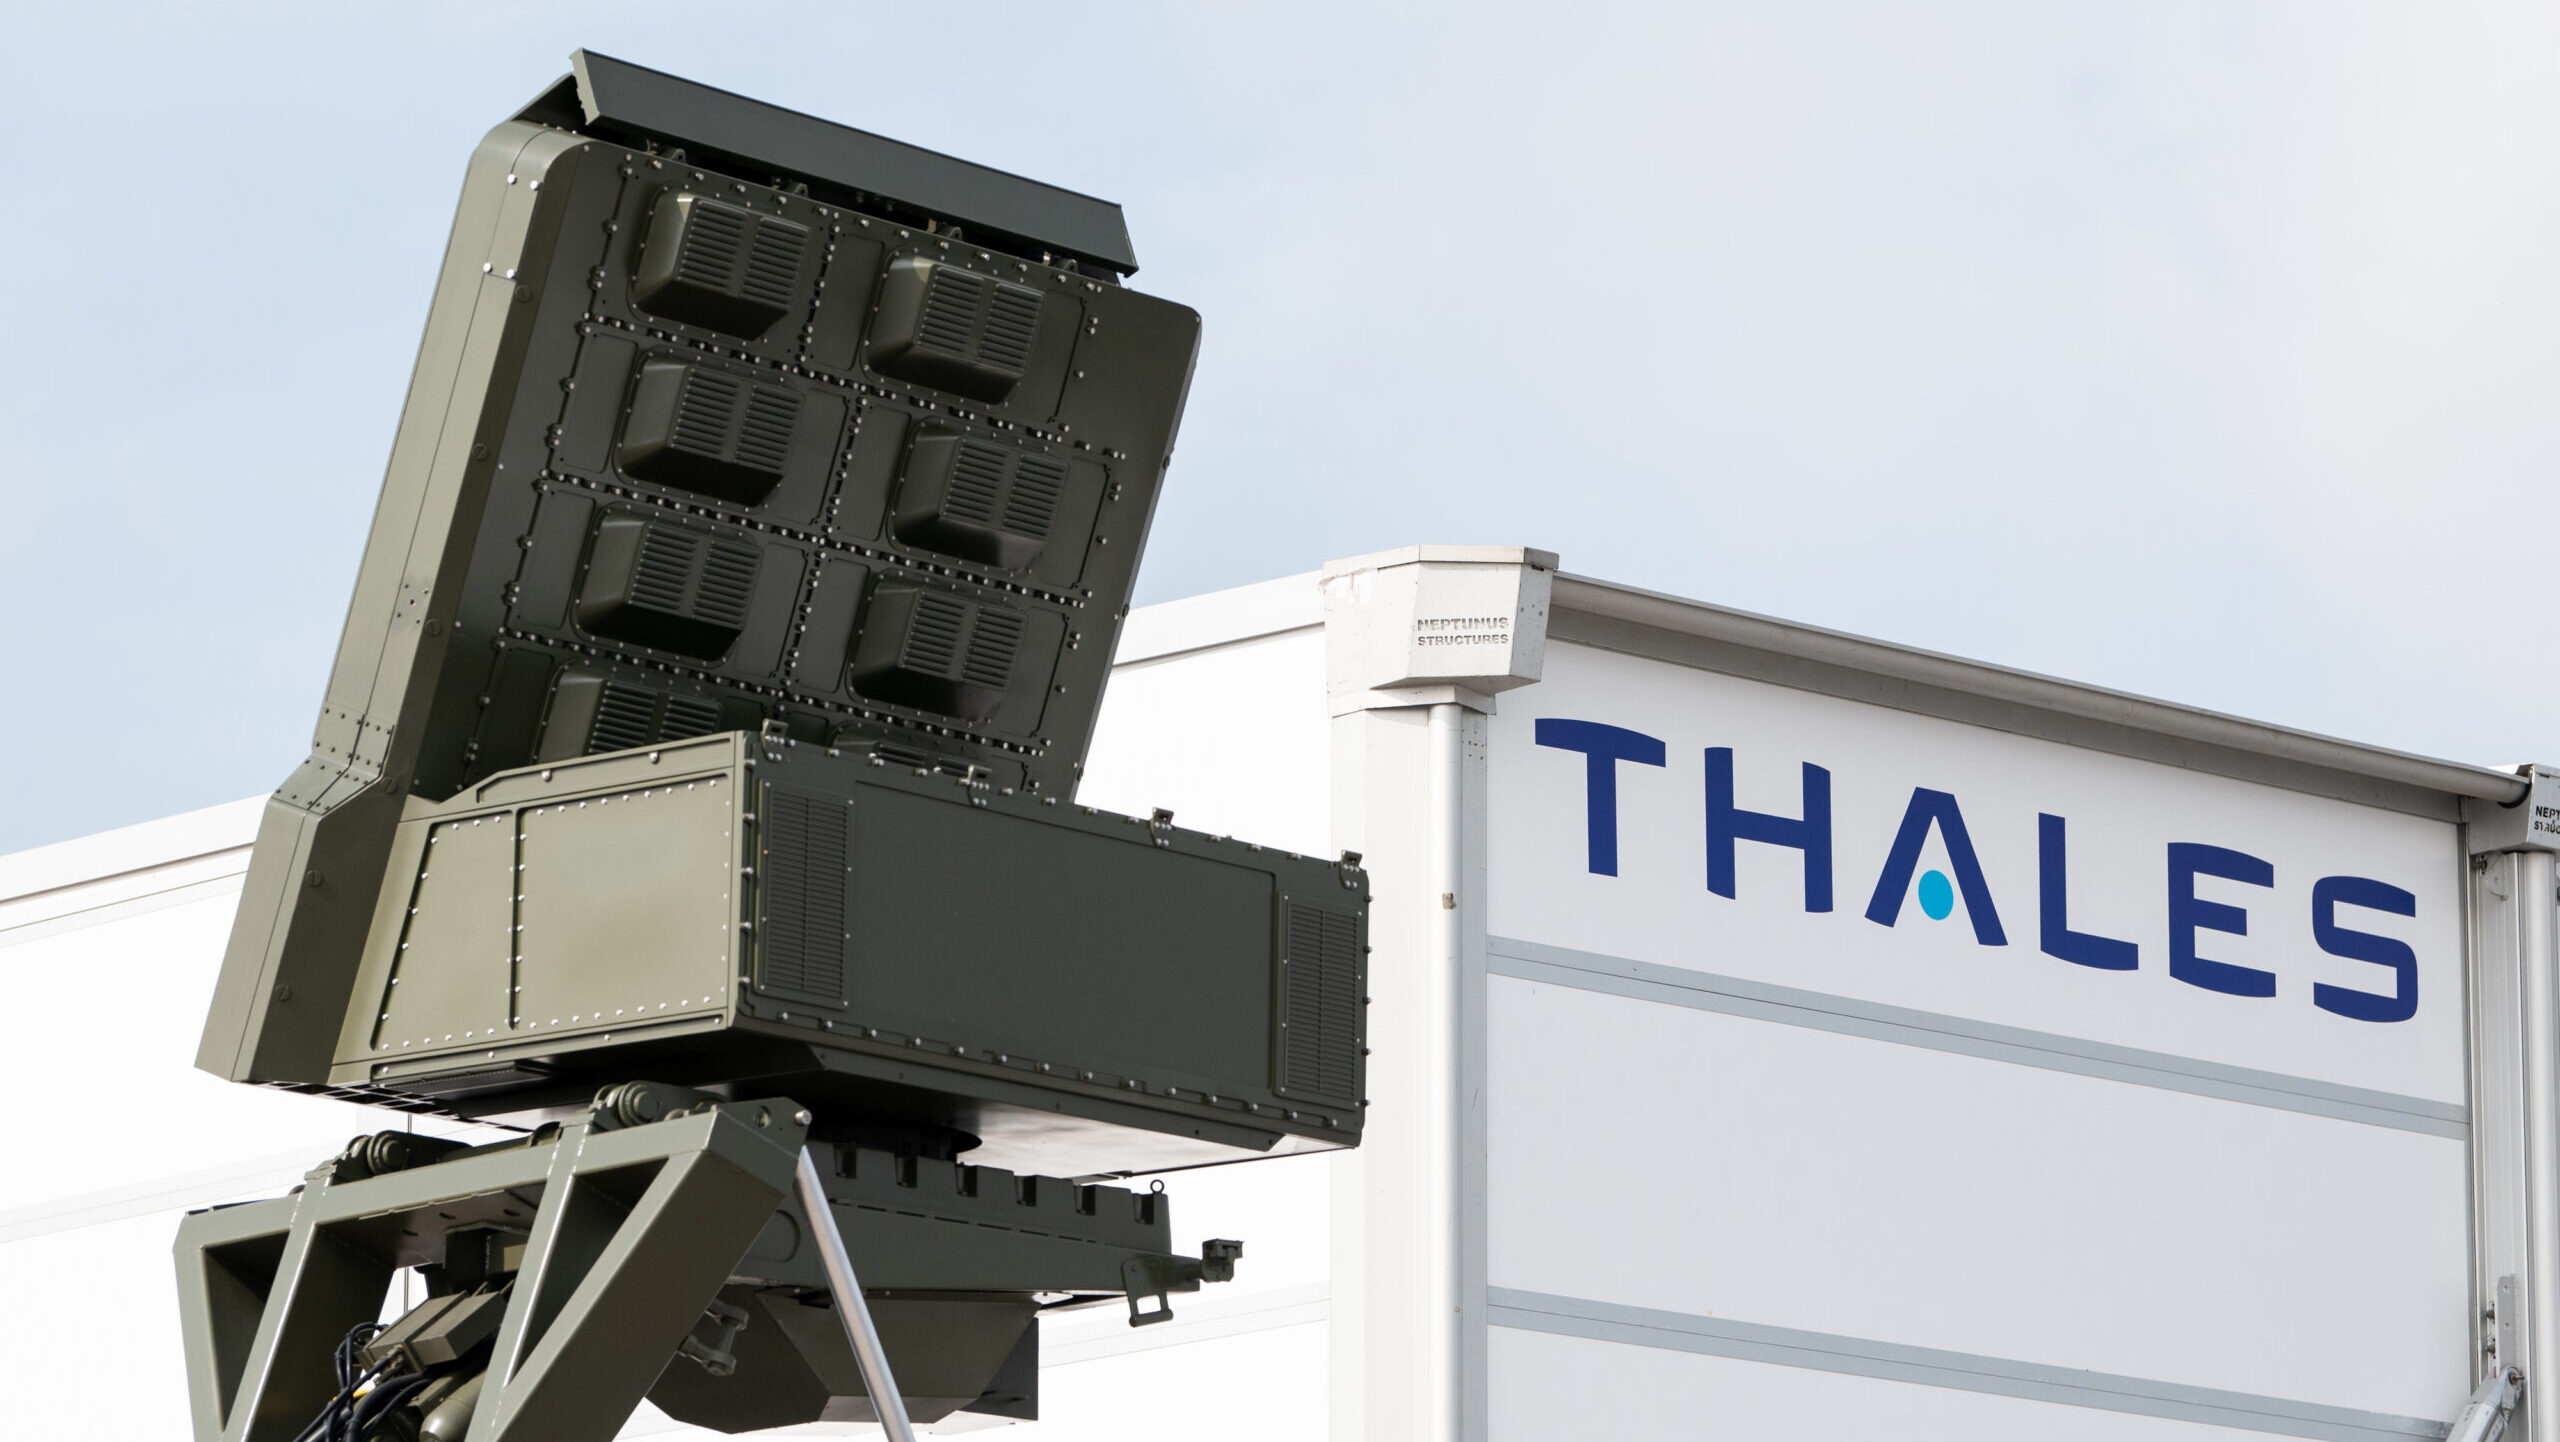 Amid influence of Starlink, Thales buys Israeli company Get SAT